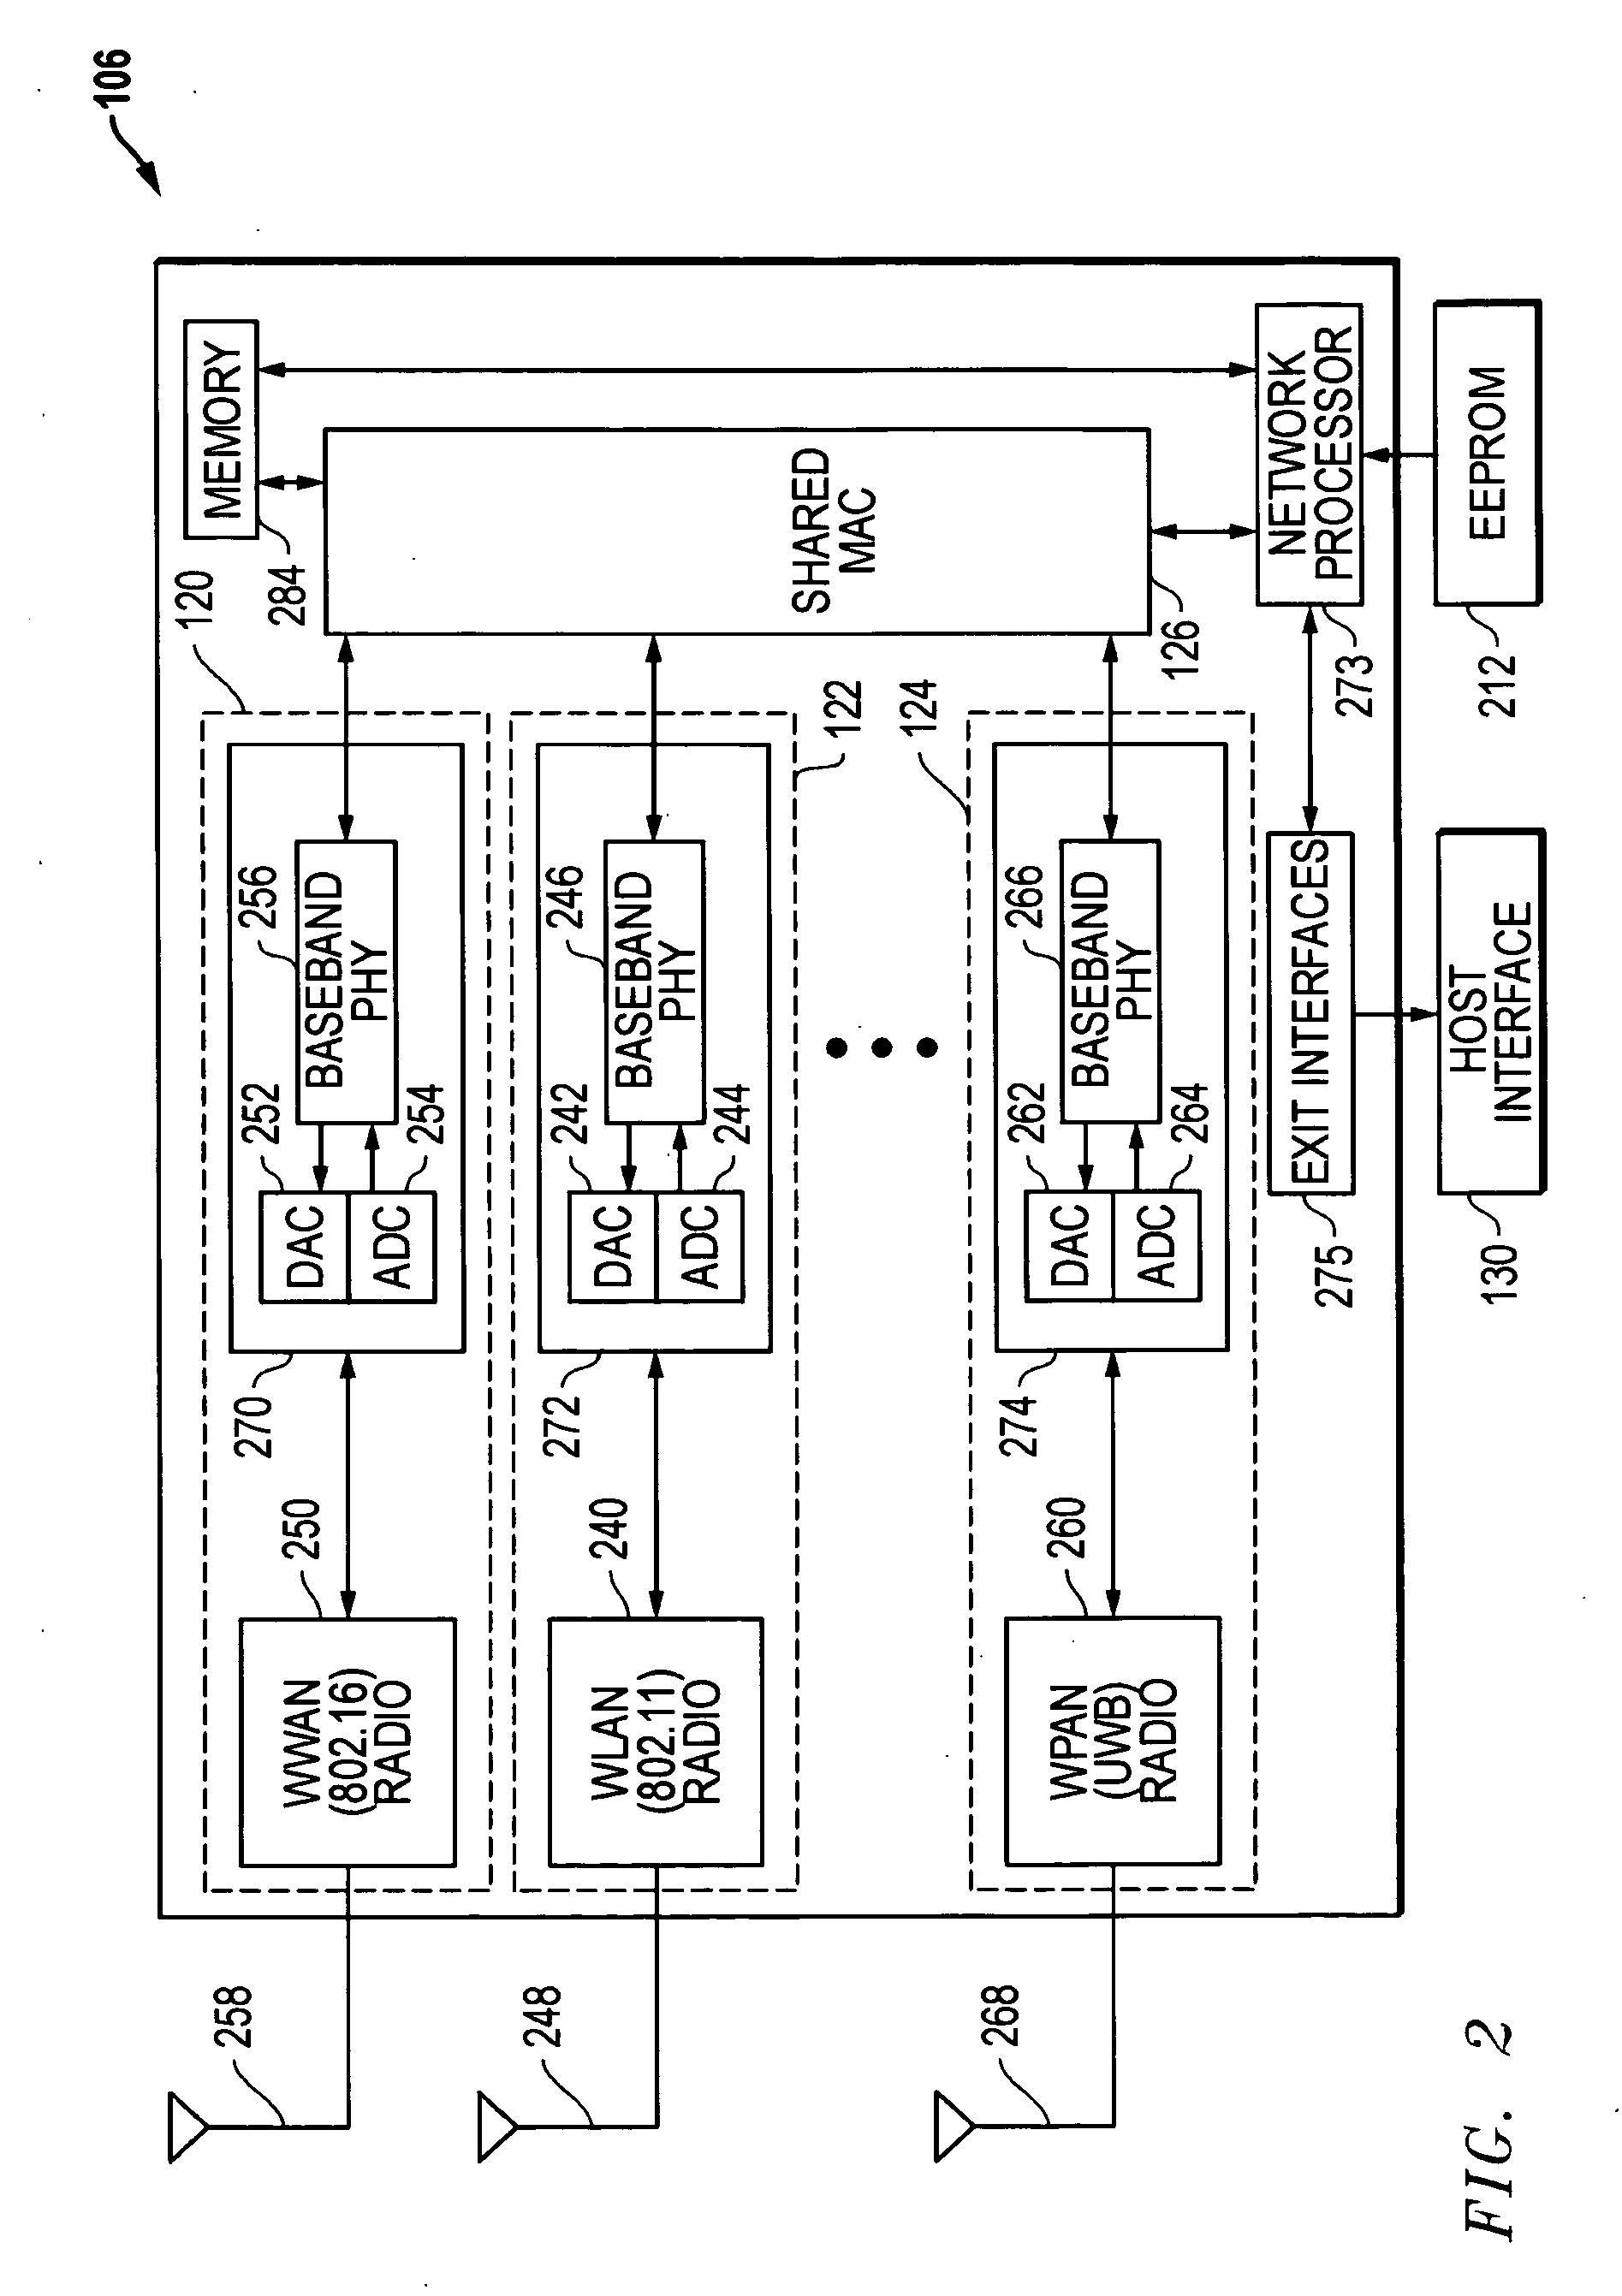 Systems and methods for distribution of wireless network access